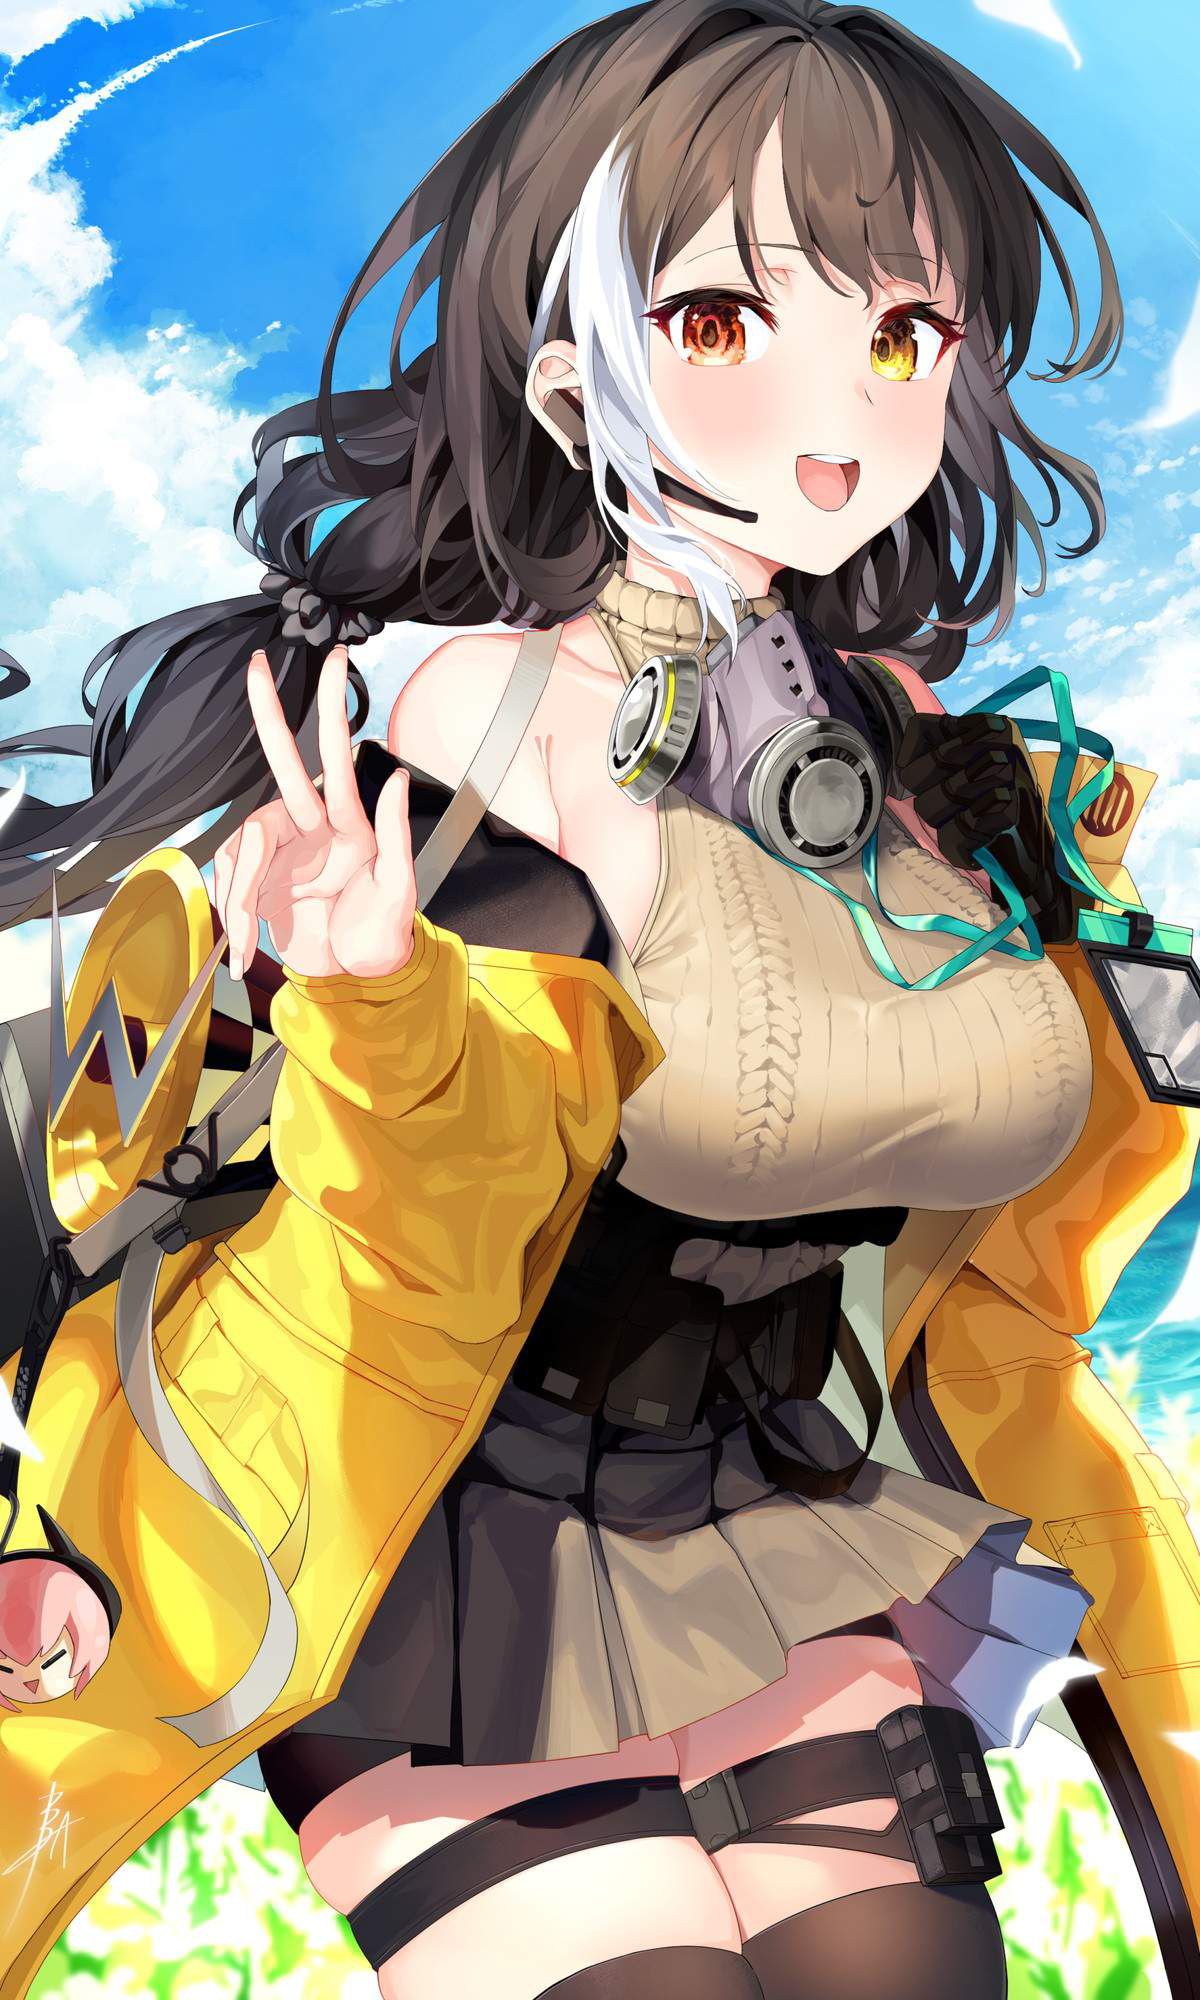 [Dolls Frontline] High-quality erotic images that can be used as RO635 wallpapers (PC/ smartphone) 6